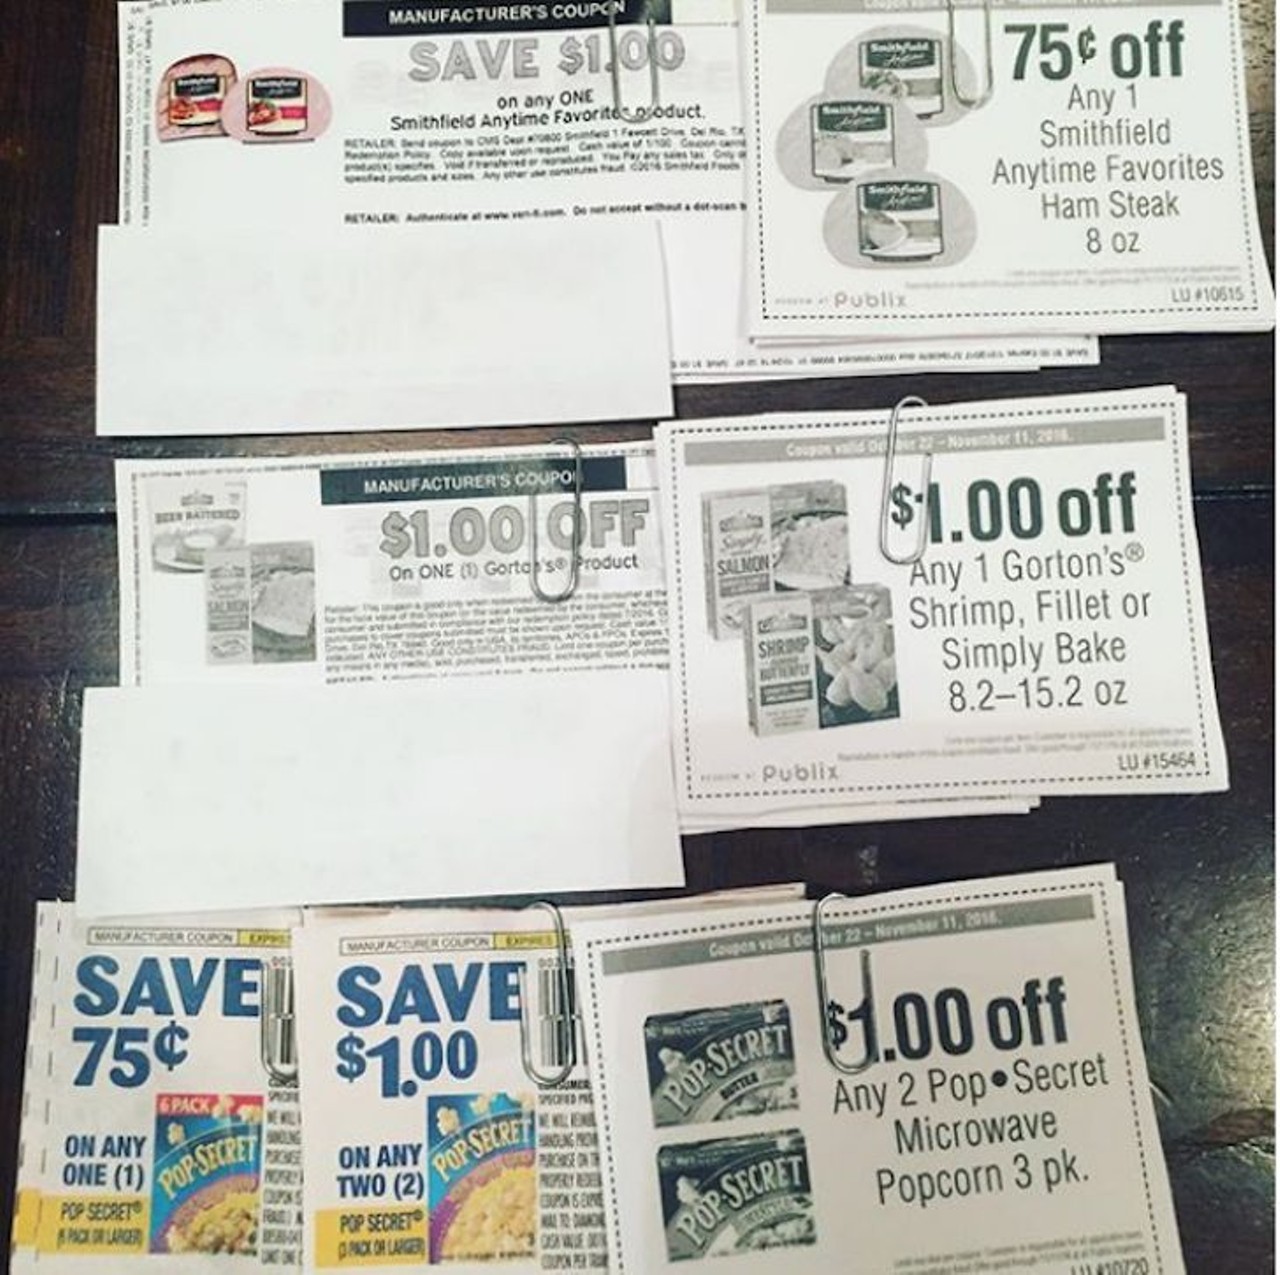 Publix will even take competitor coupons
Competitors' coupons are accepted at Publix, but it is based on region and each Publix takes different coupons. The eligible stores are always posted in customer service. If a store you like to shop at isn't included, then you can request that the coupons be honored by the District Manager.
Photo via couponwenchatl